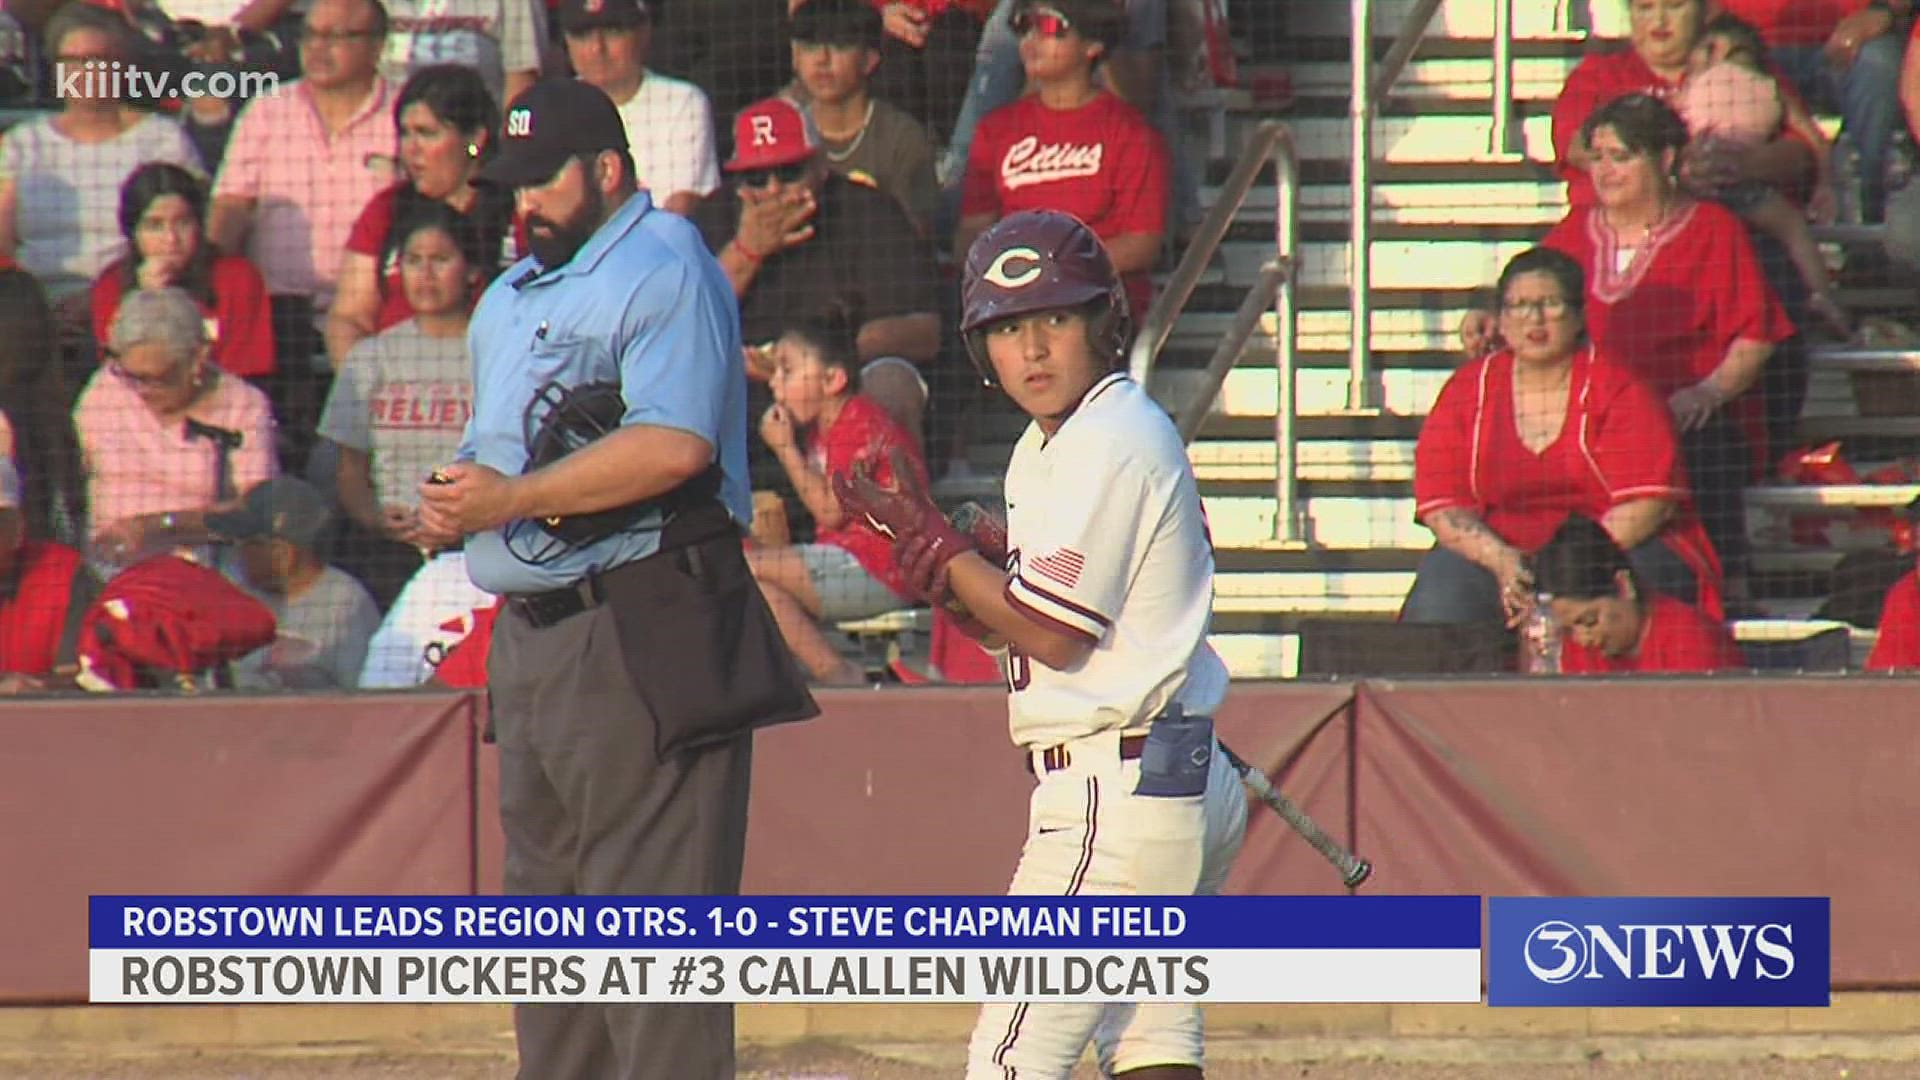 Calallen wins Game 2 battle with Robstown 6-4. T-M edged Alice 5-3. Vets topped Sharyland Pioneer 13-6 in Game 2.